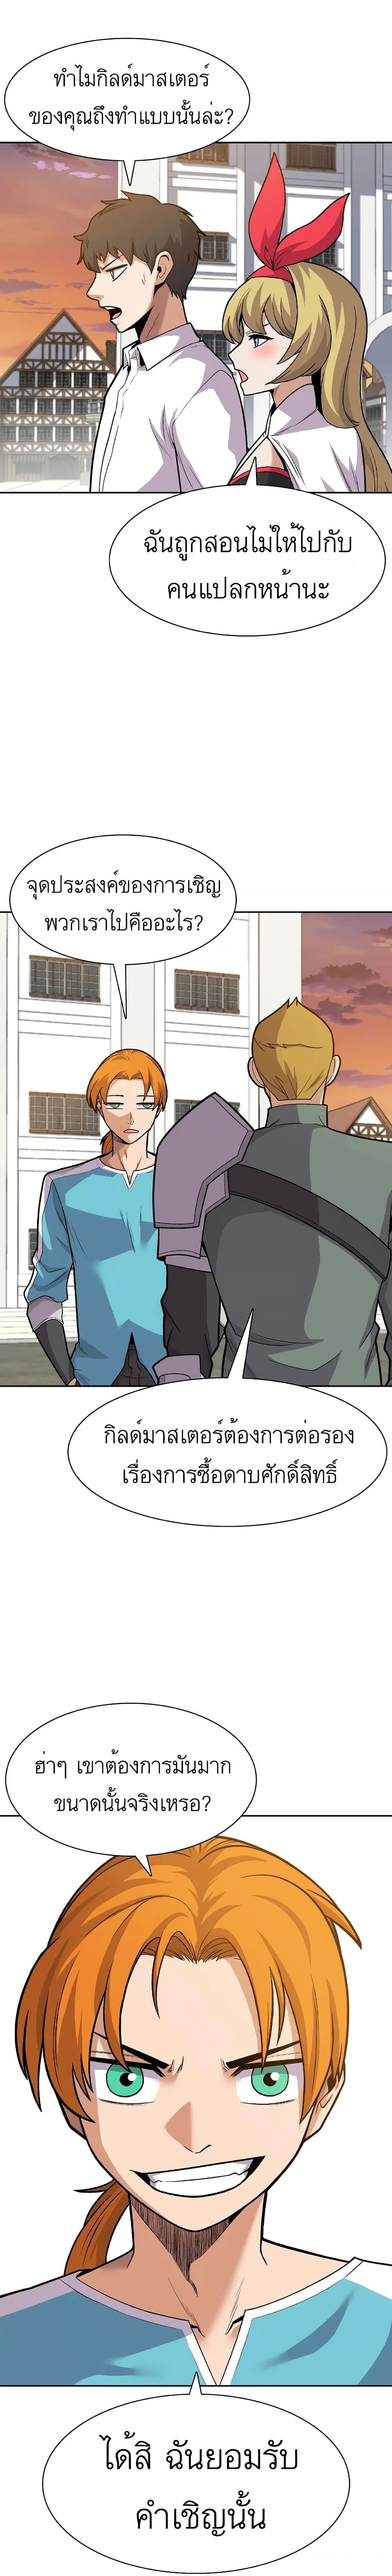 Raising Newbie Heroes In Another World ตอนที่ 14 (12)